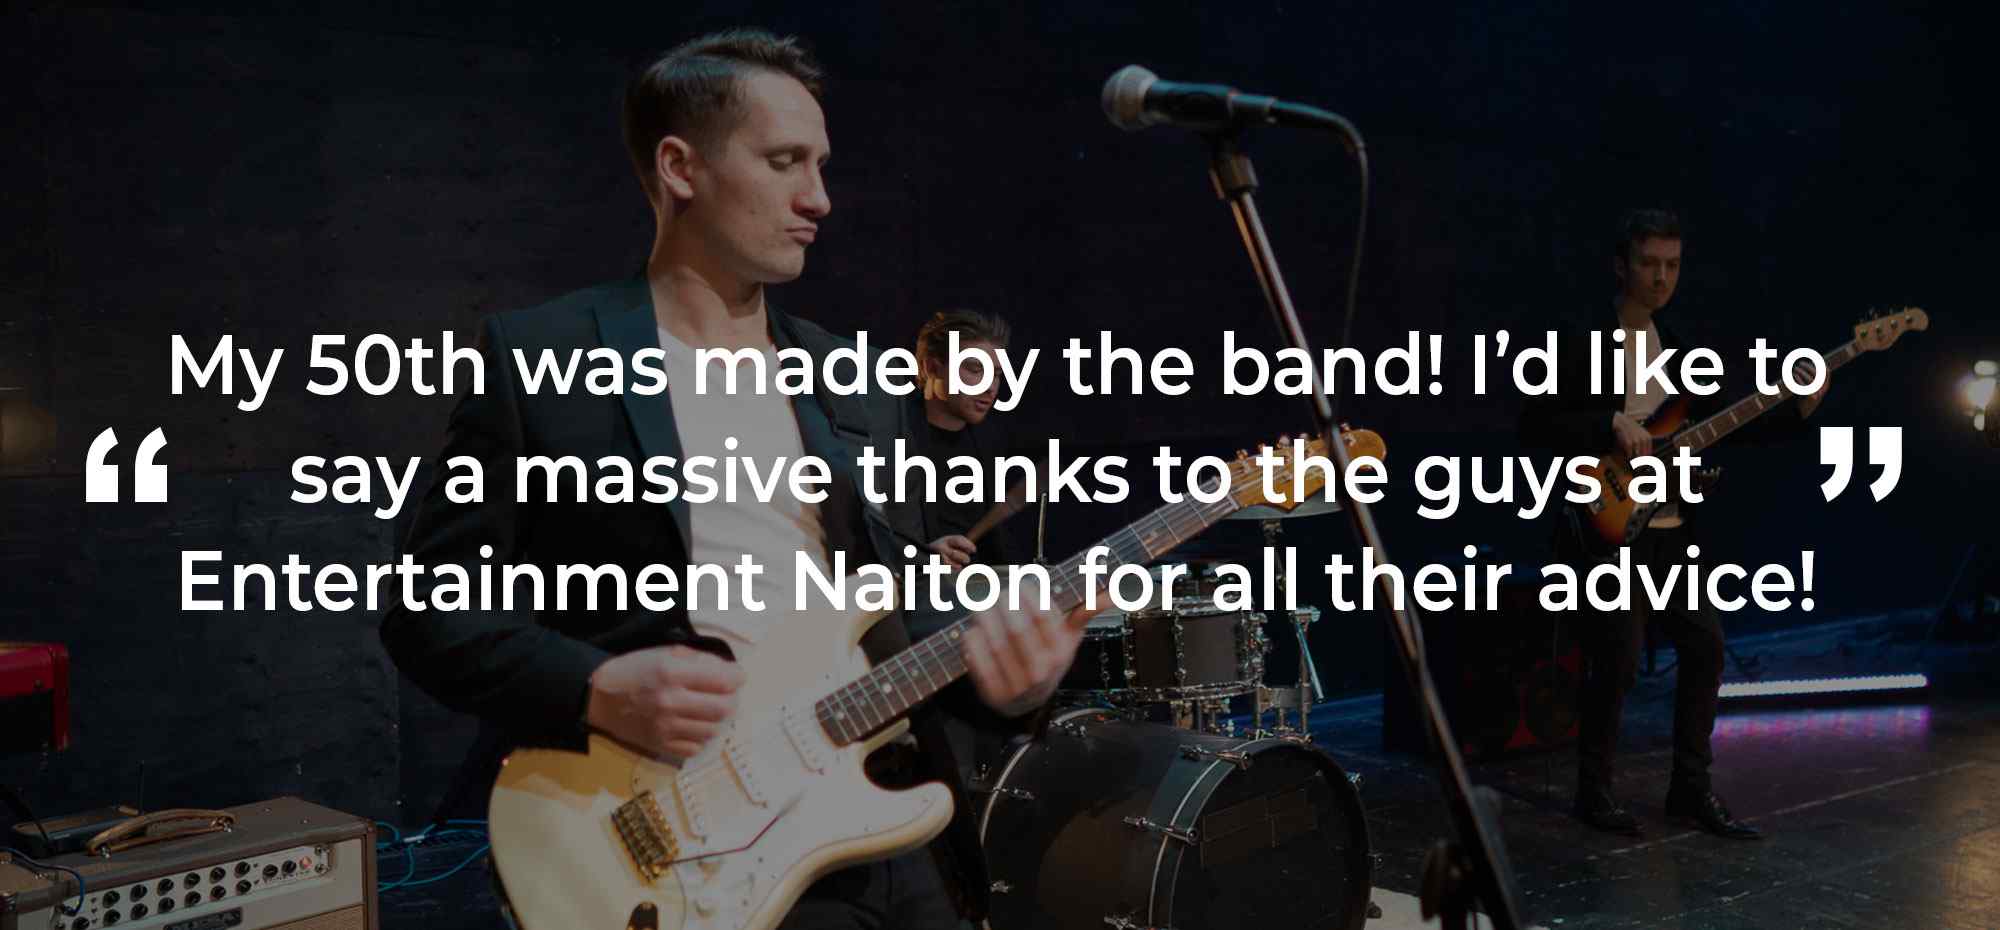 Client Review of a Party Band Durham